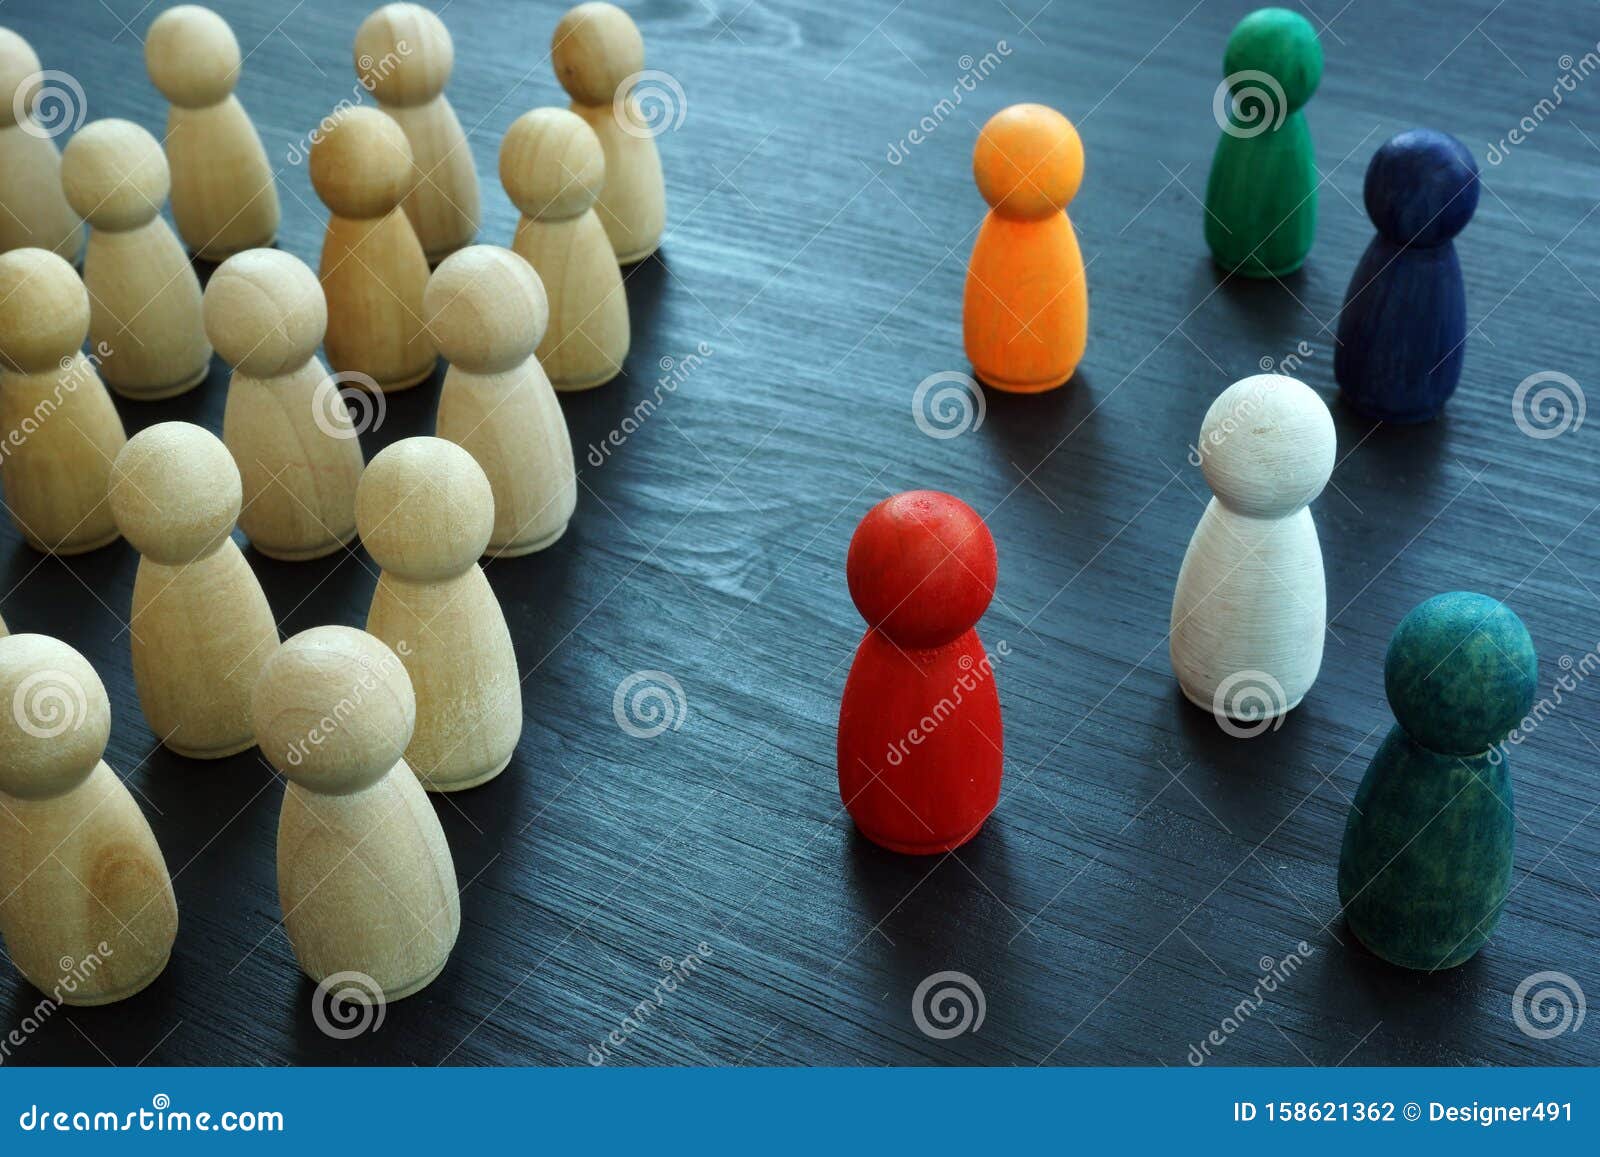 diversity and inclusion. wooden and colored figurines